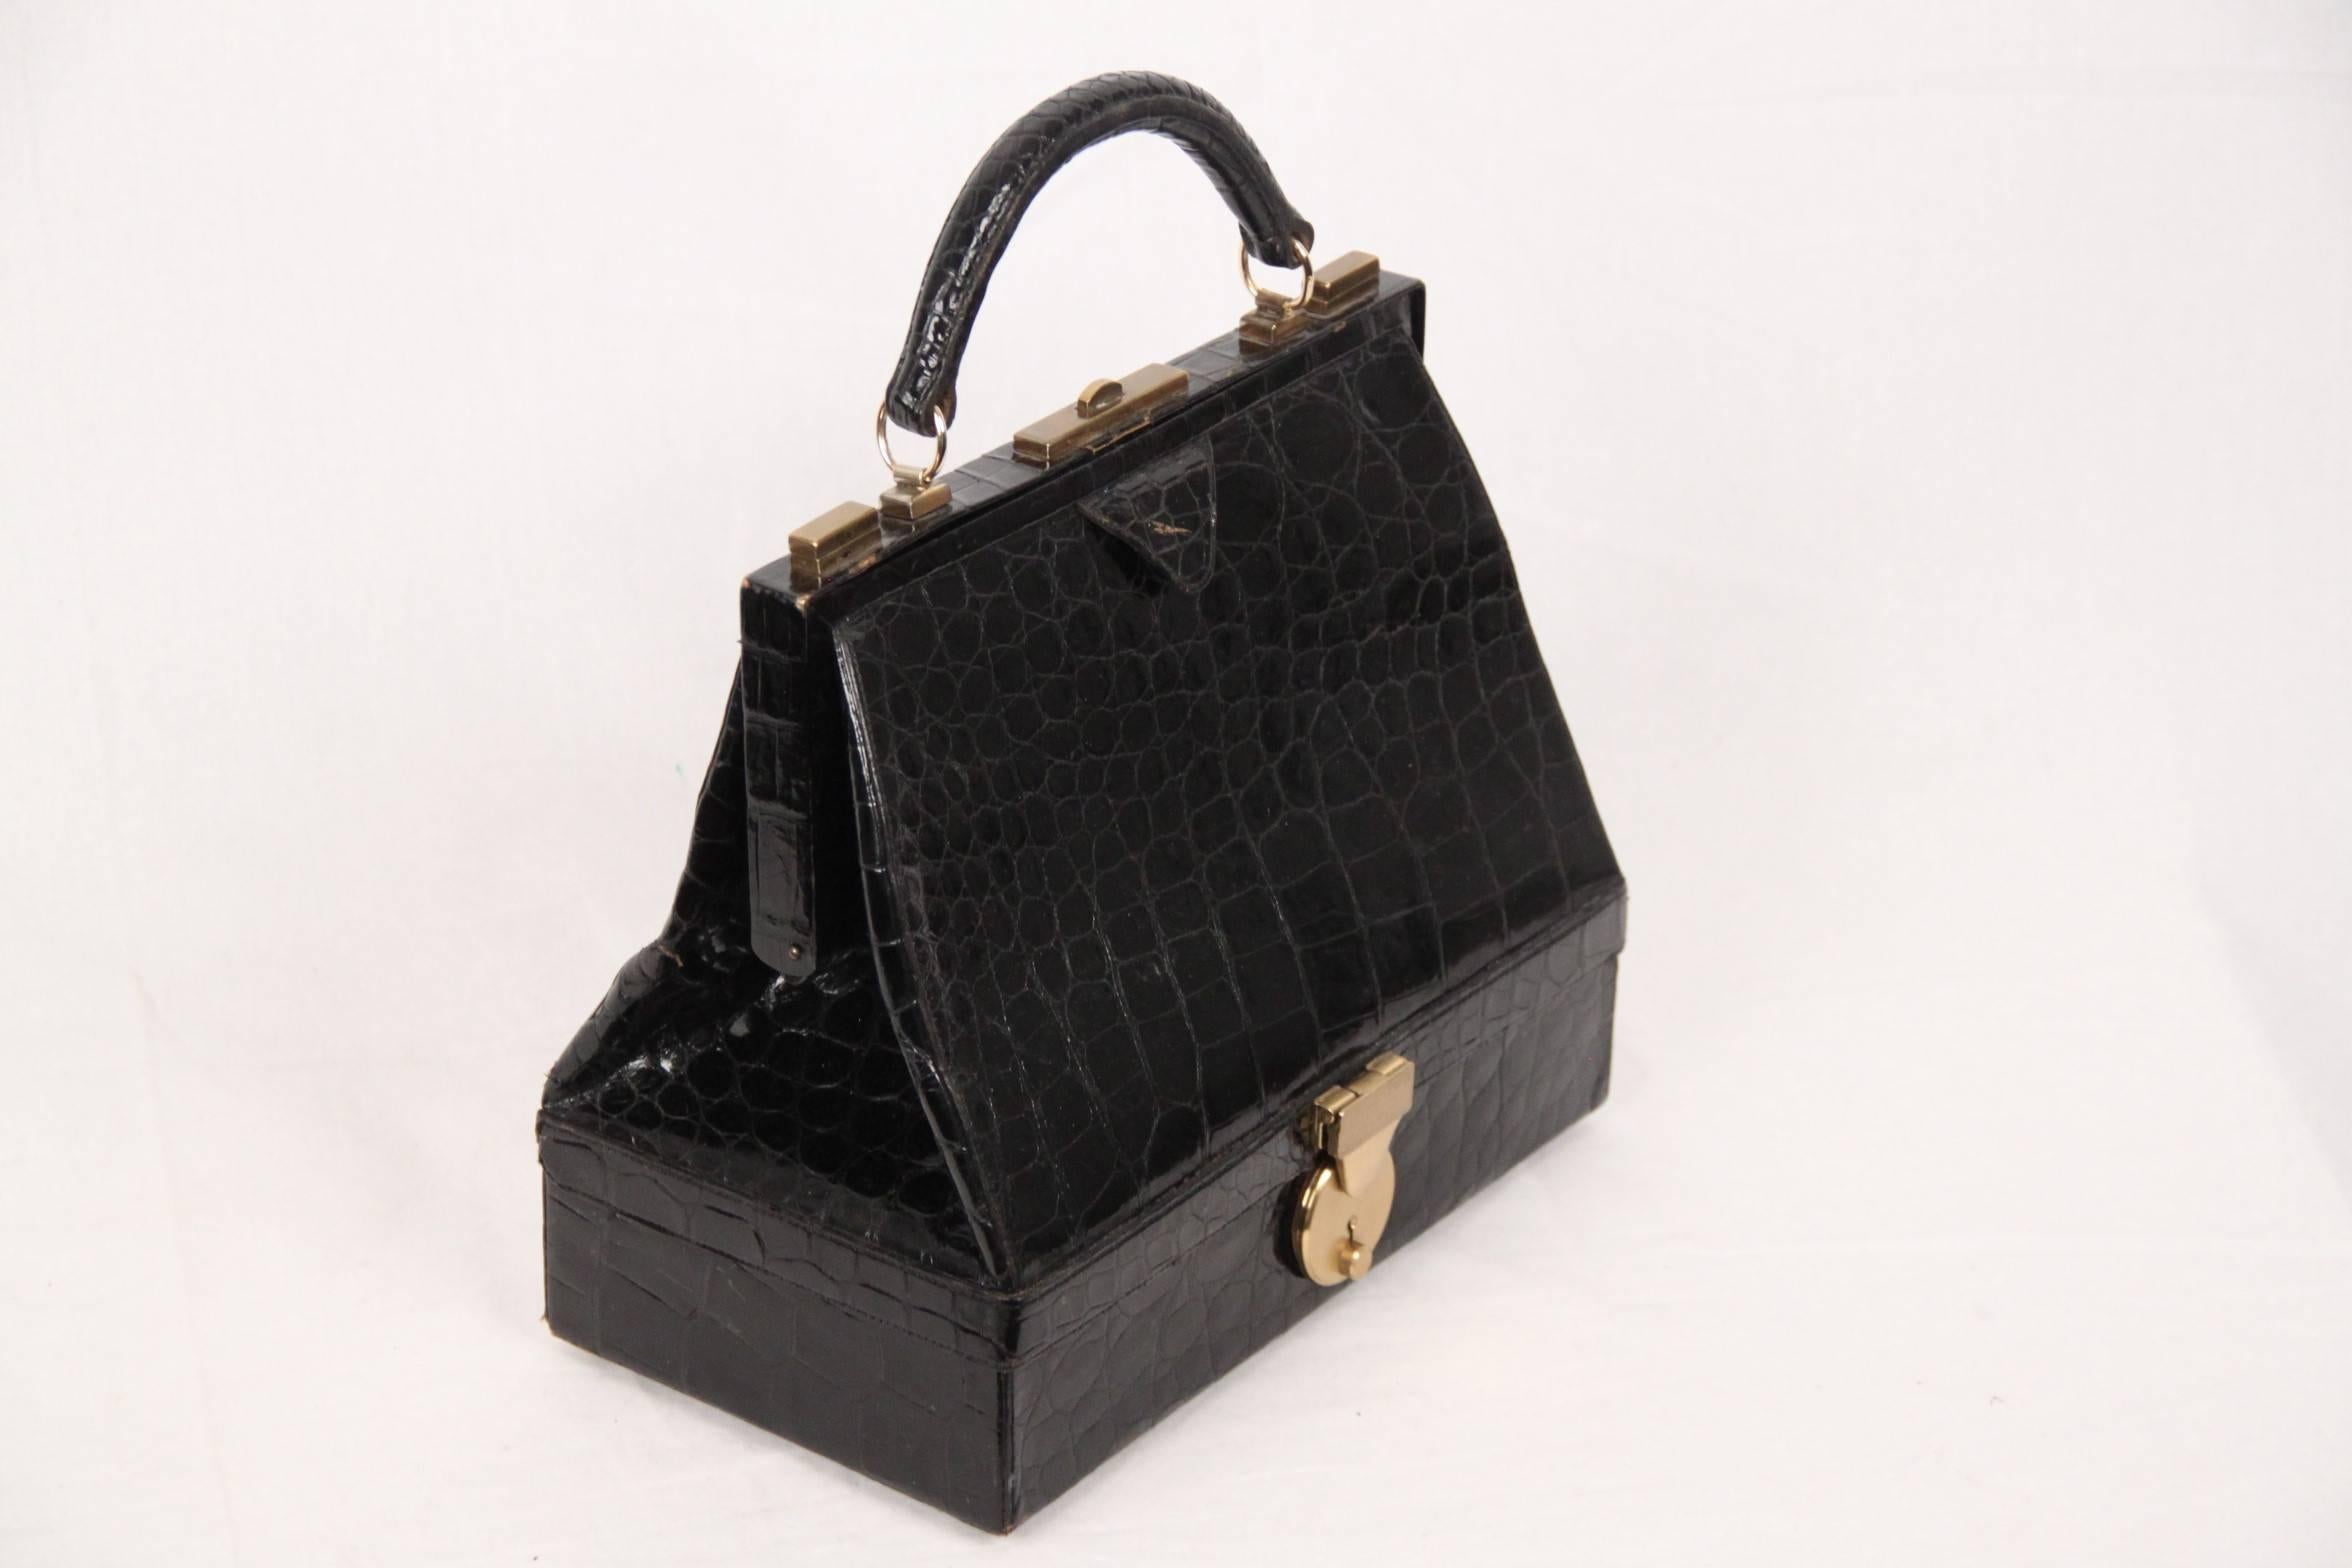 - Vintage black Crocodile structured handbag with bottom compartment
- The bag was particularly favored by wealthy women in the 1950s and 1960s who, when traveling, could carry their fine jewelry with them
- Upper push closure + double side